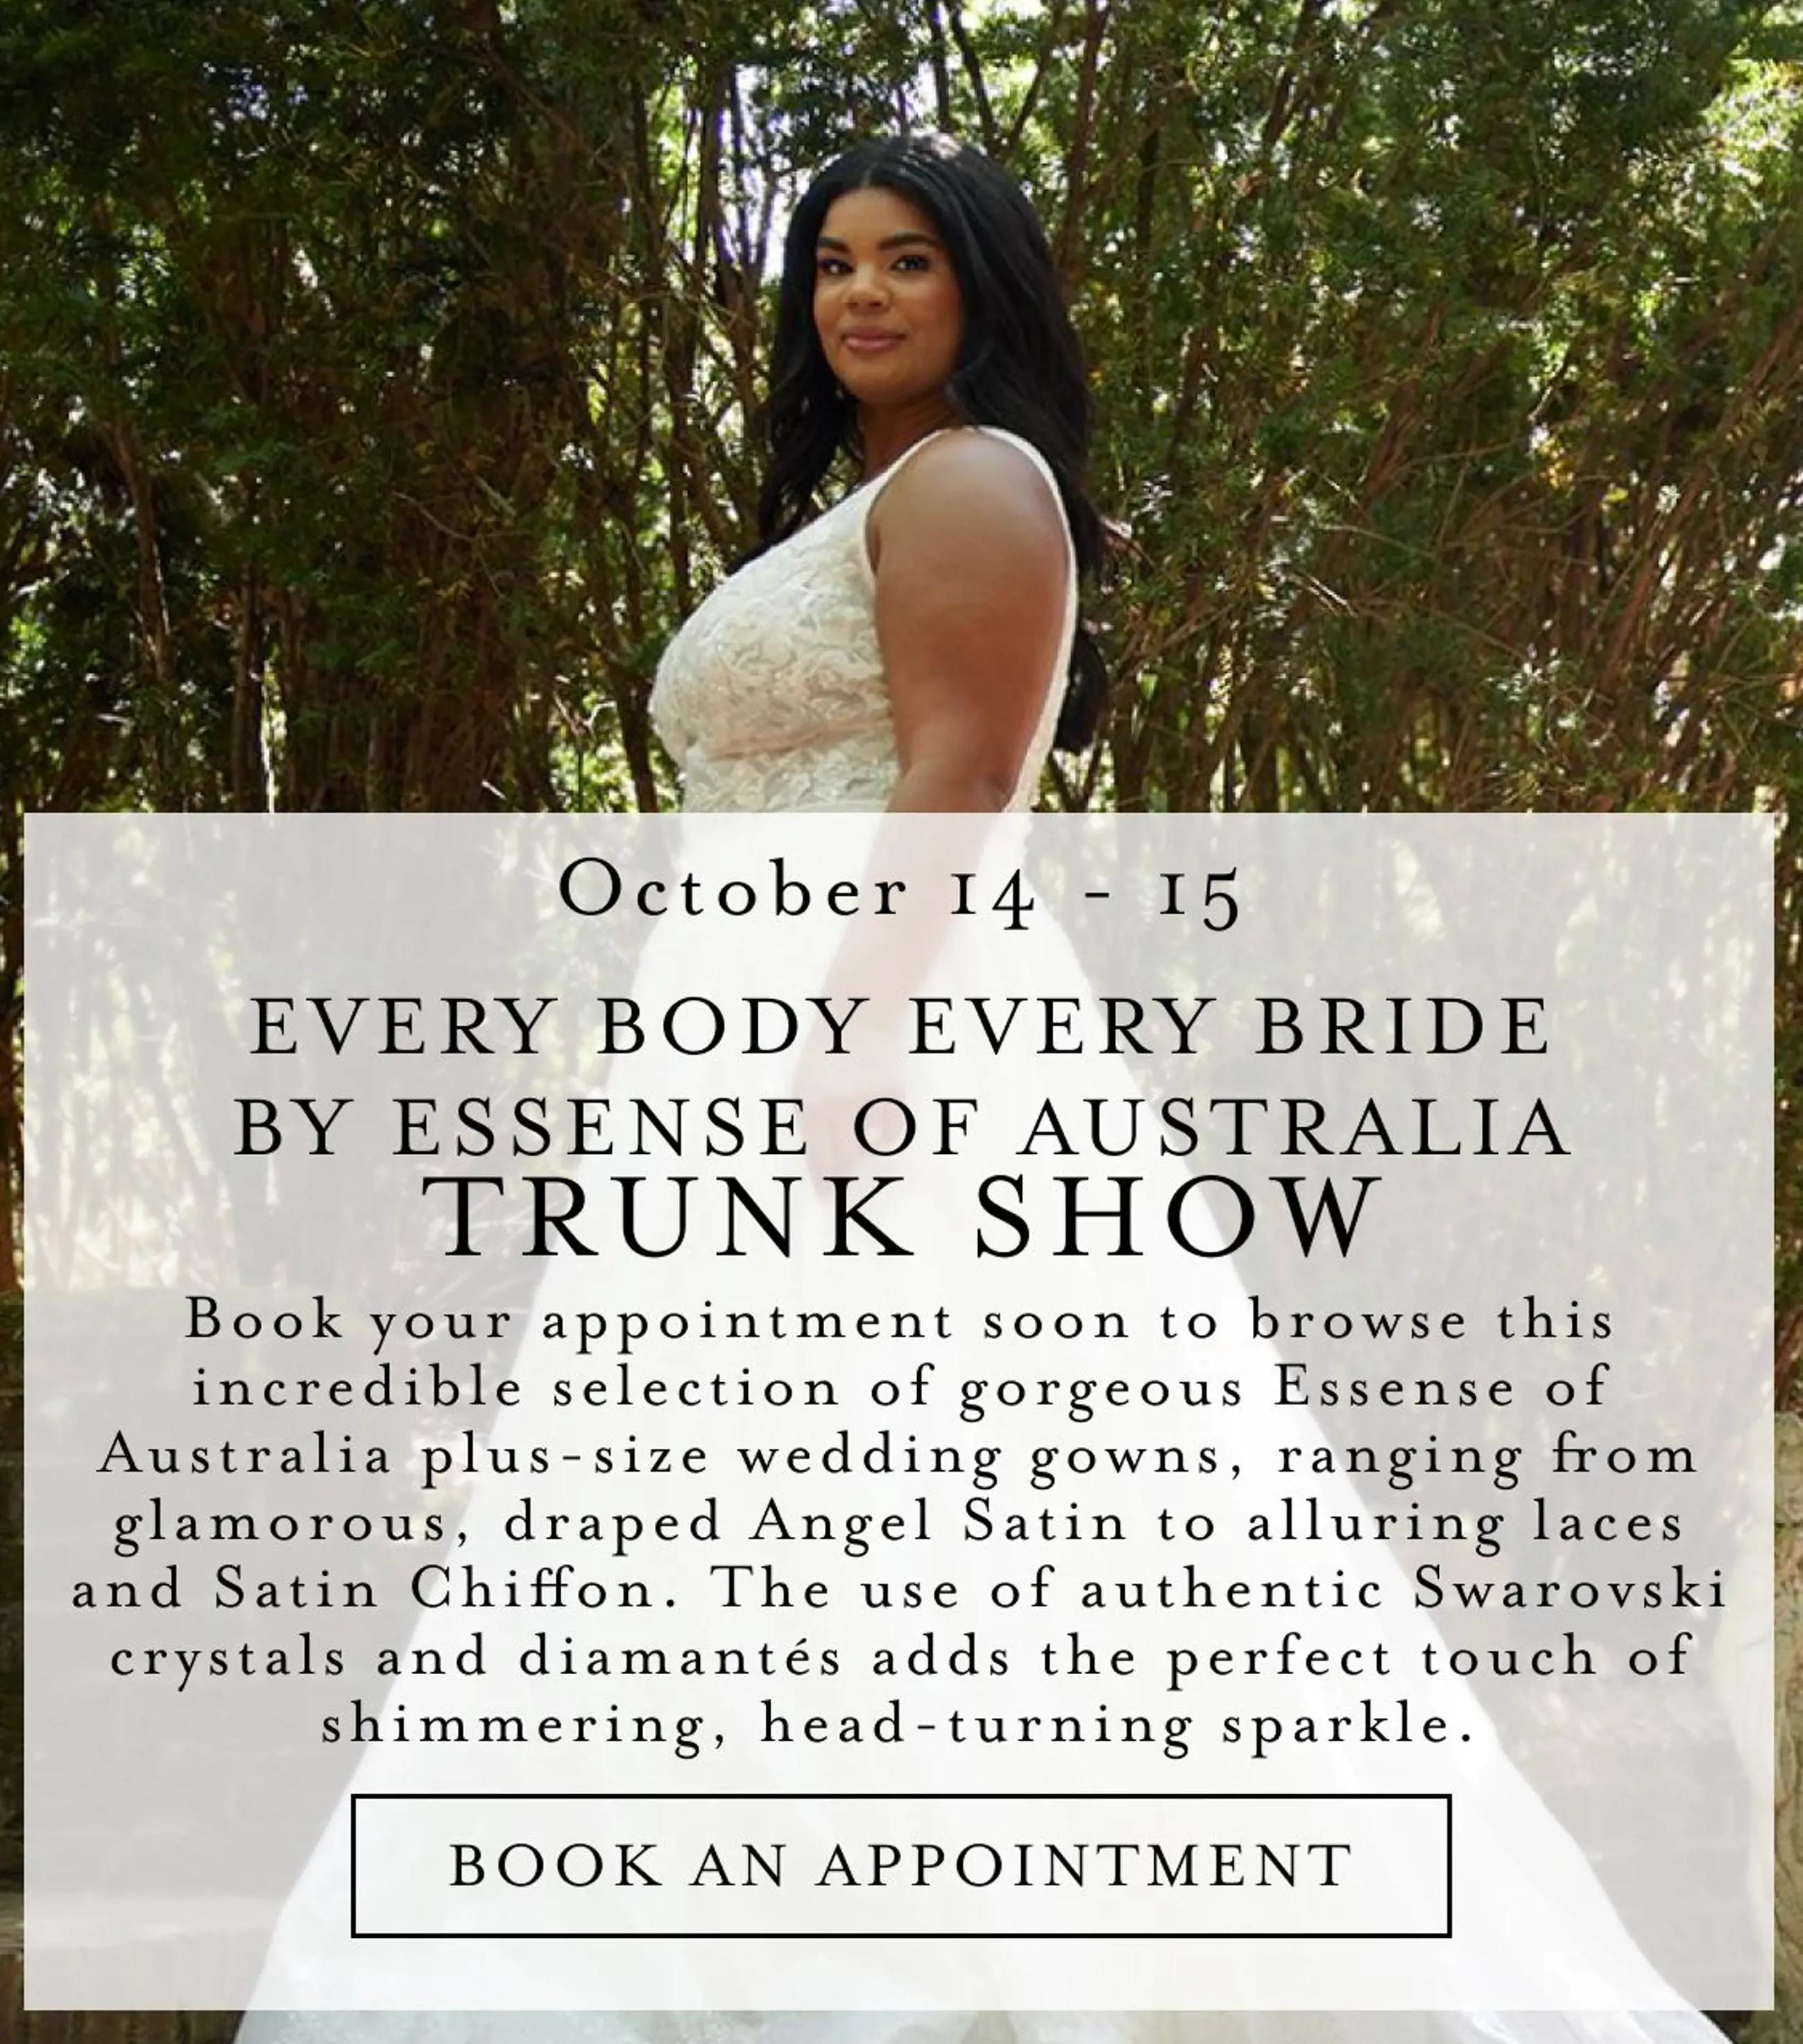 Every Body Every Bride trunk show at Bella Bridal Gallery